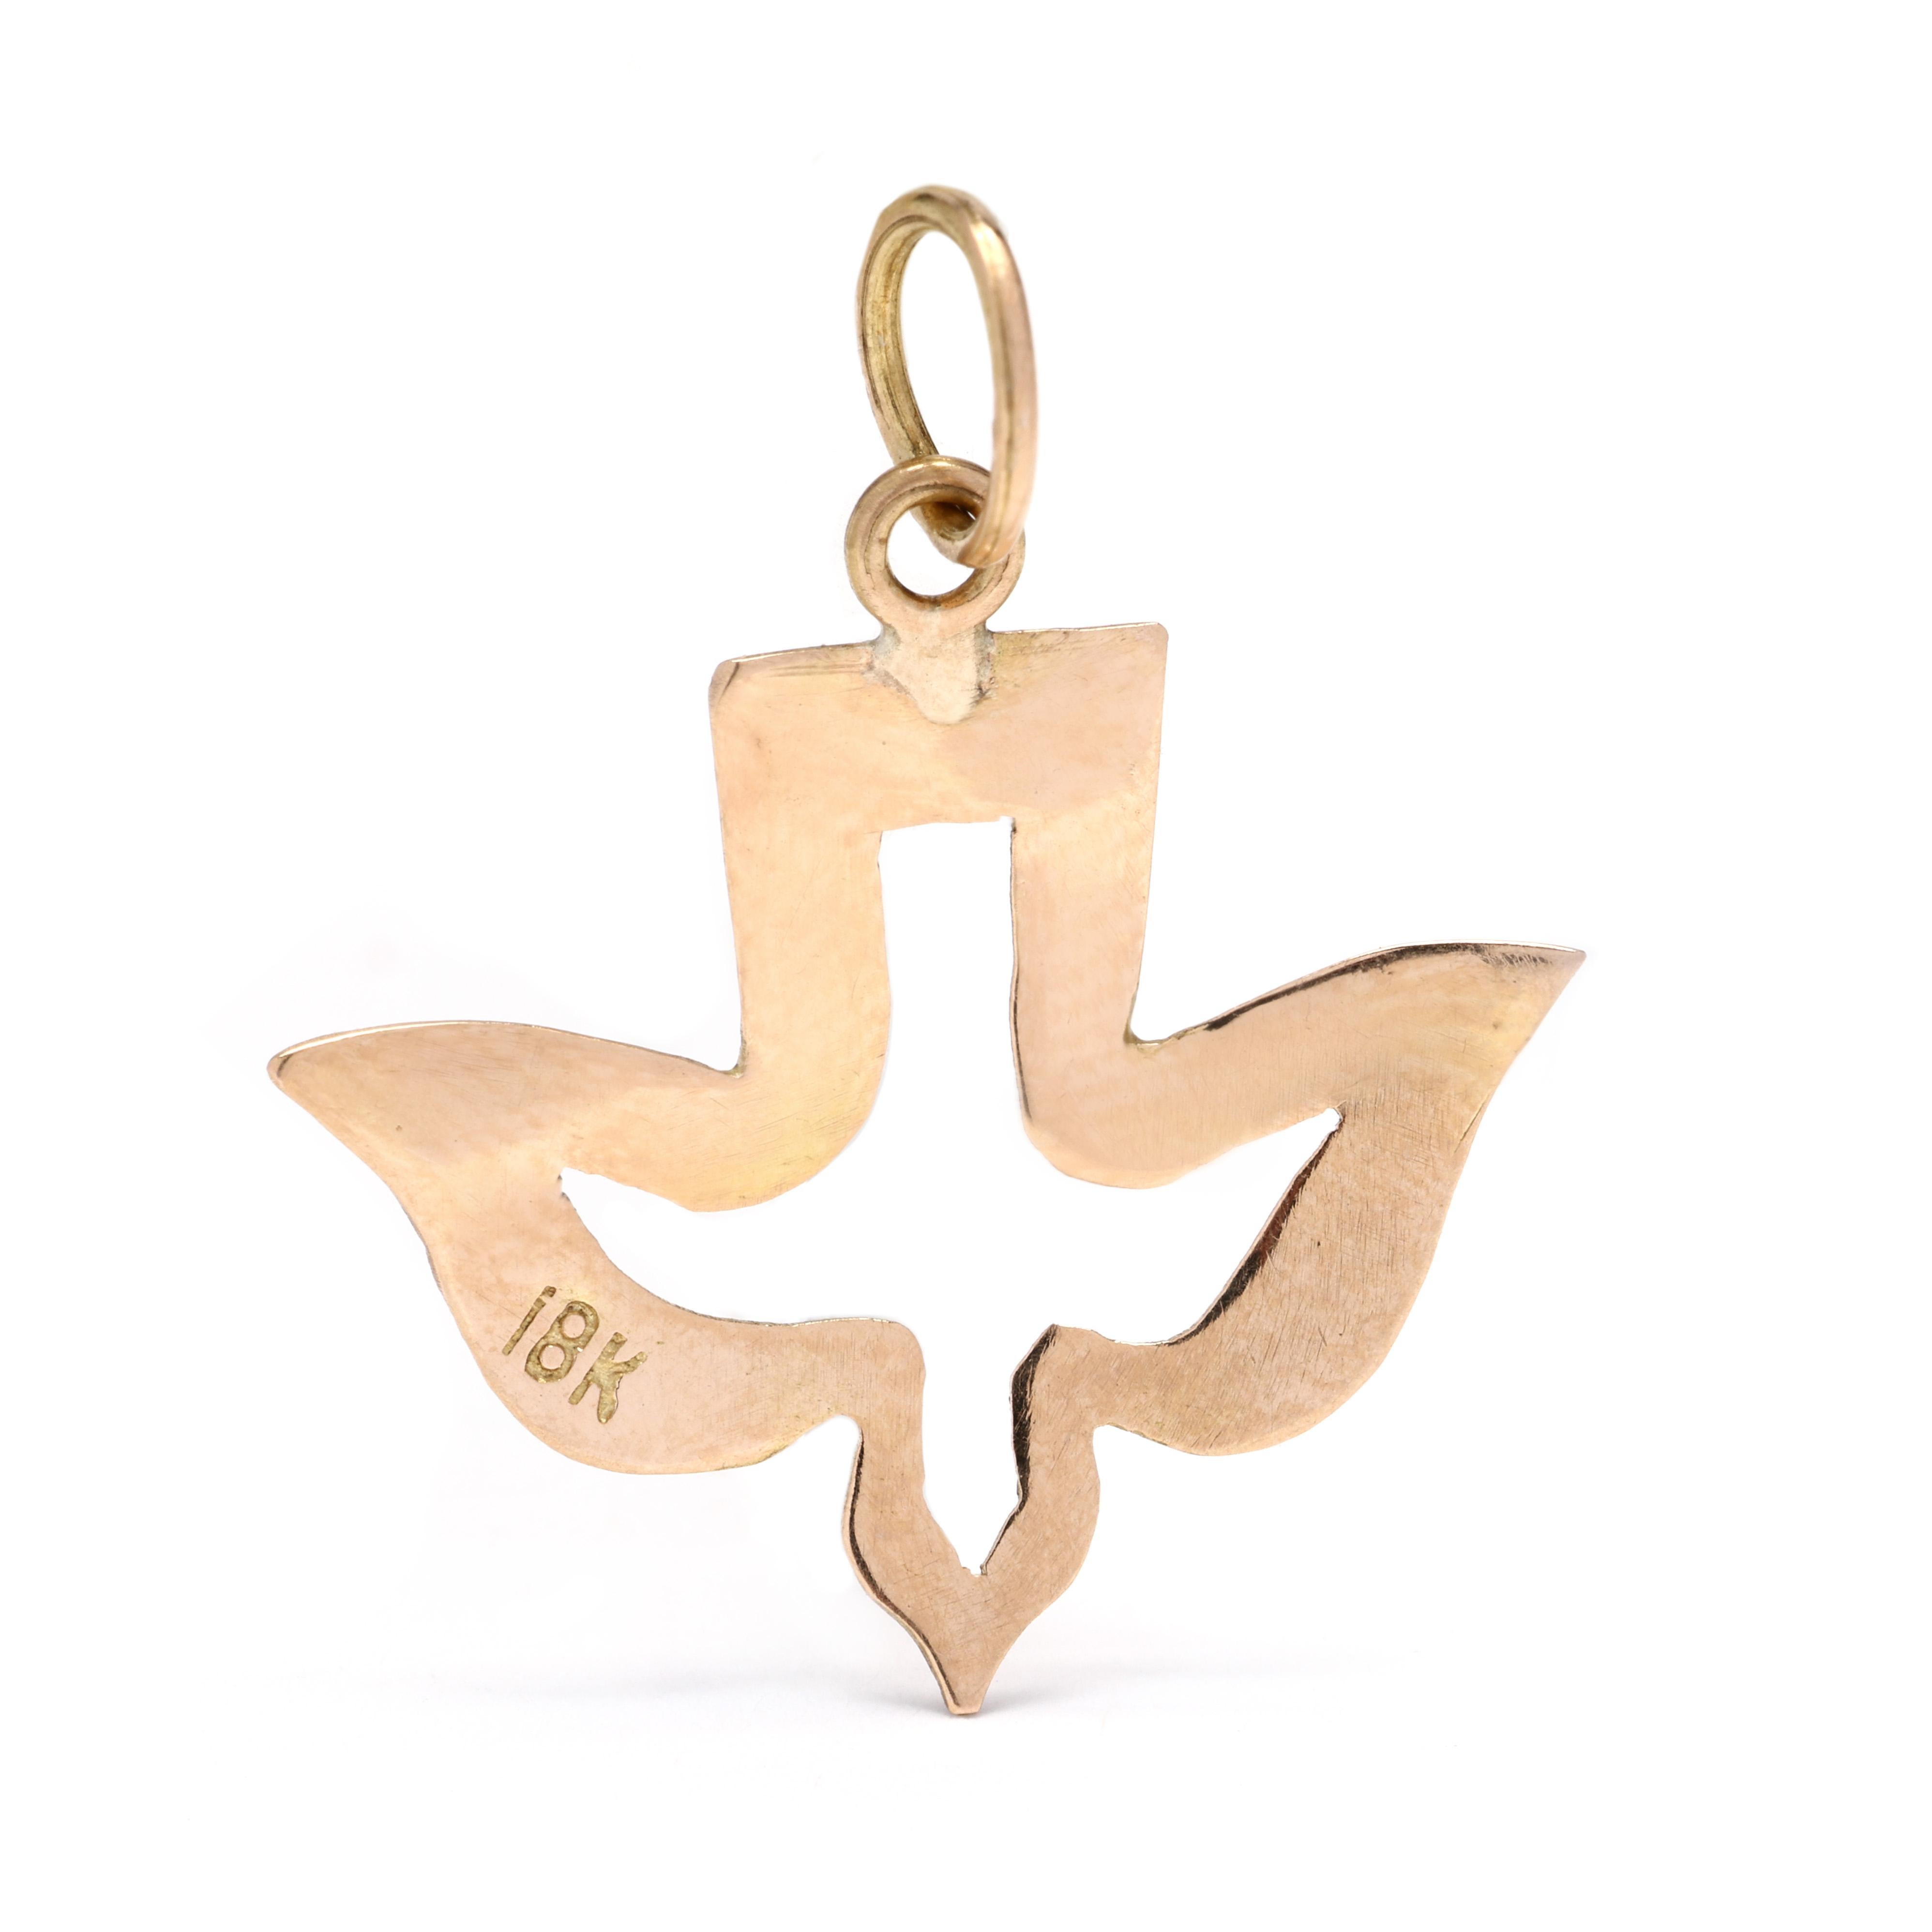 This dainty dove charm is a beautiful addition to any necklace or bracelet. Made from 18K yellow gold, this charm is a luxurious and timeless piece. The charm measures 1 inch in length, making it a delicate and eye-catching addition to your jewelry